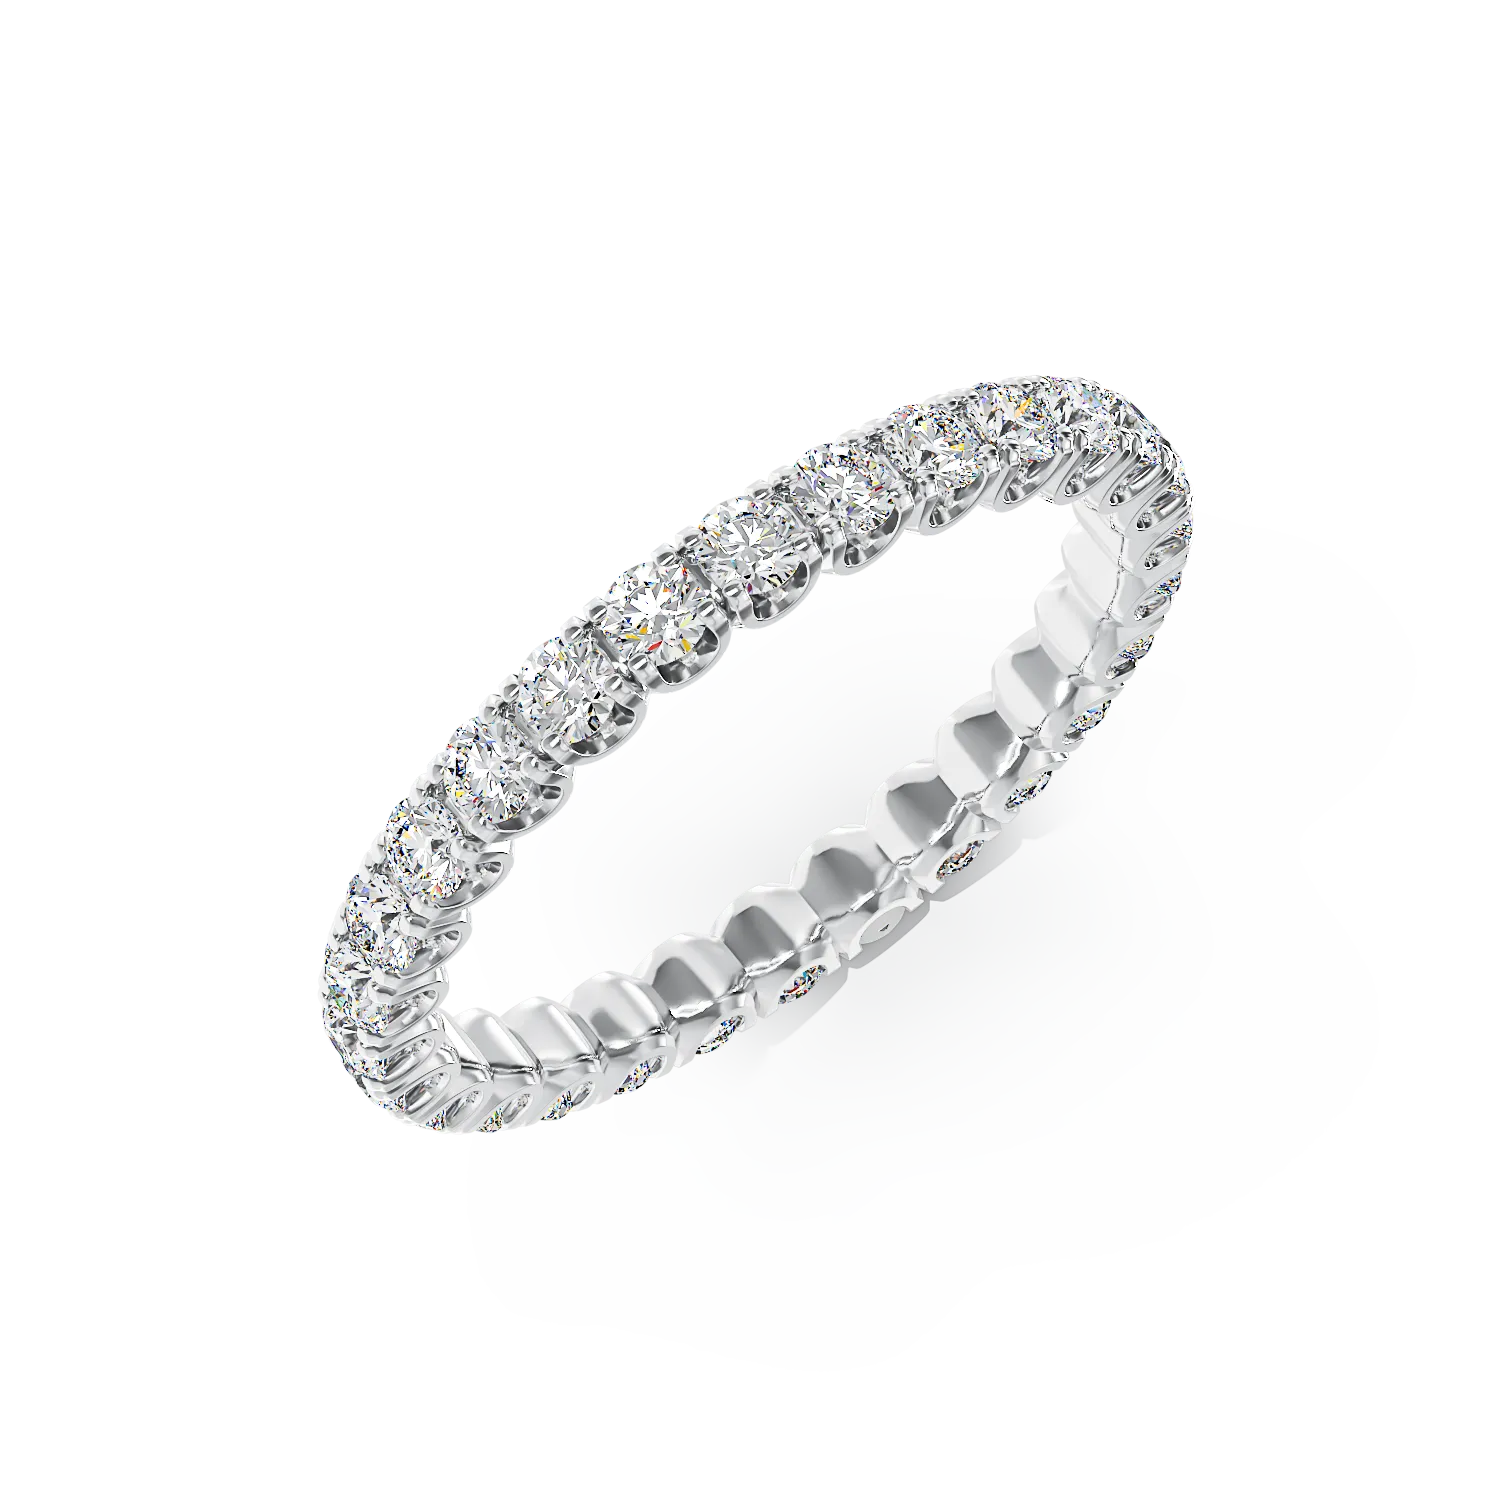 Eternity ring in white gold with 1ct diamonds